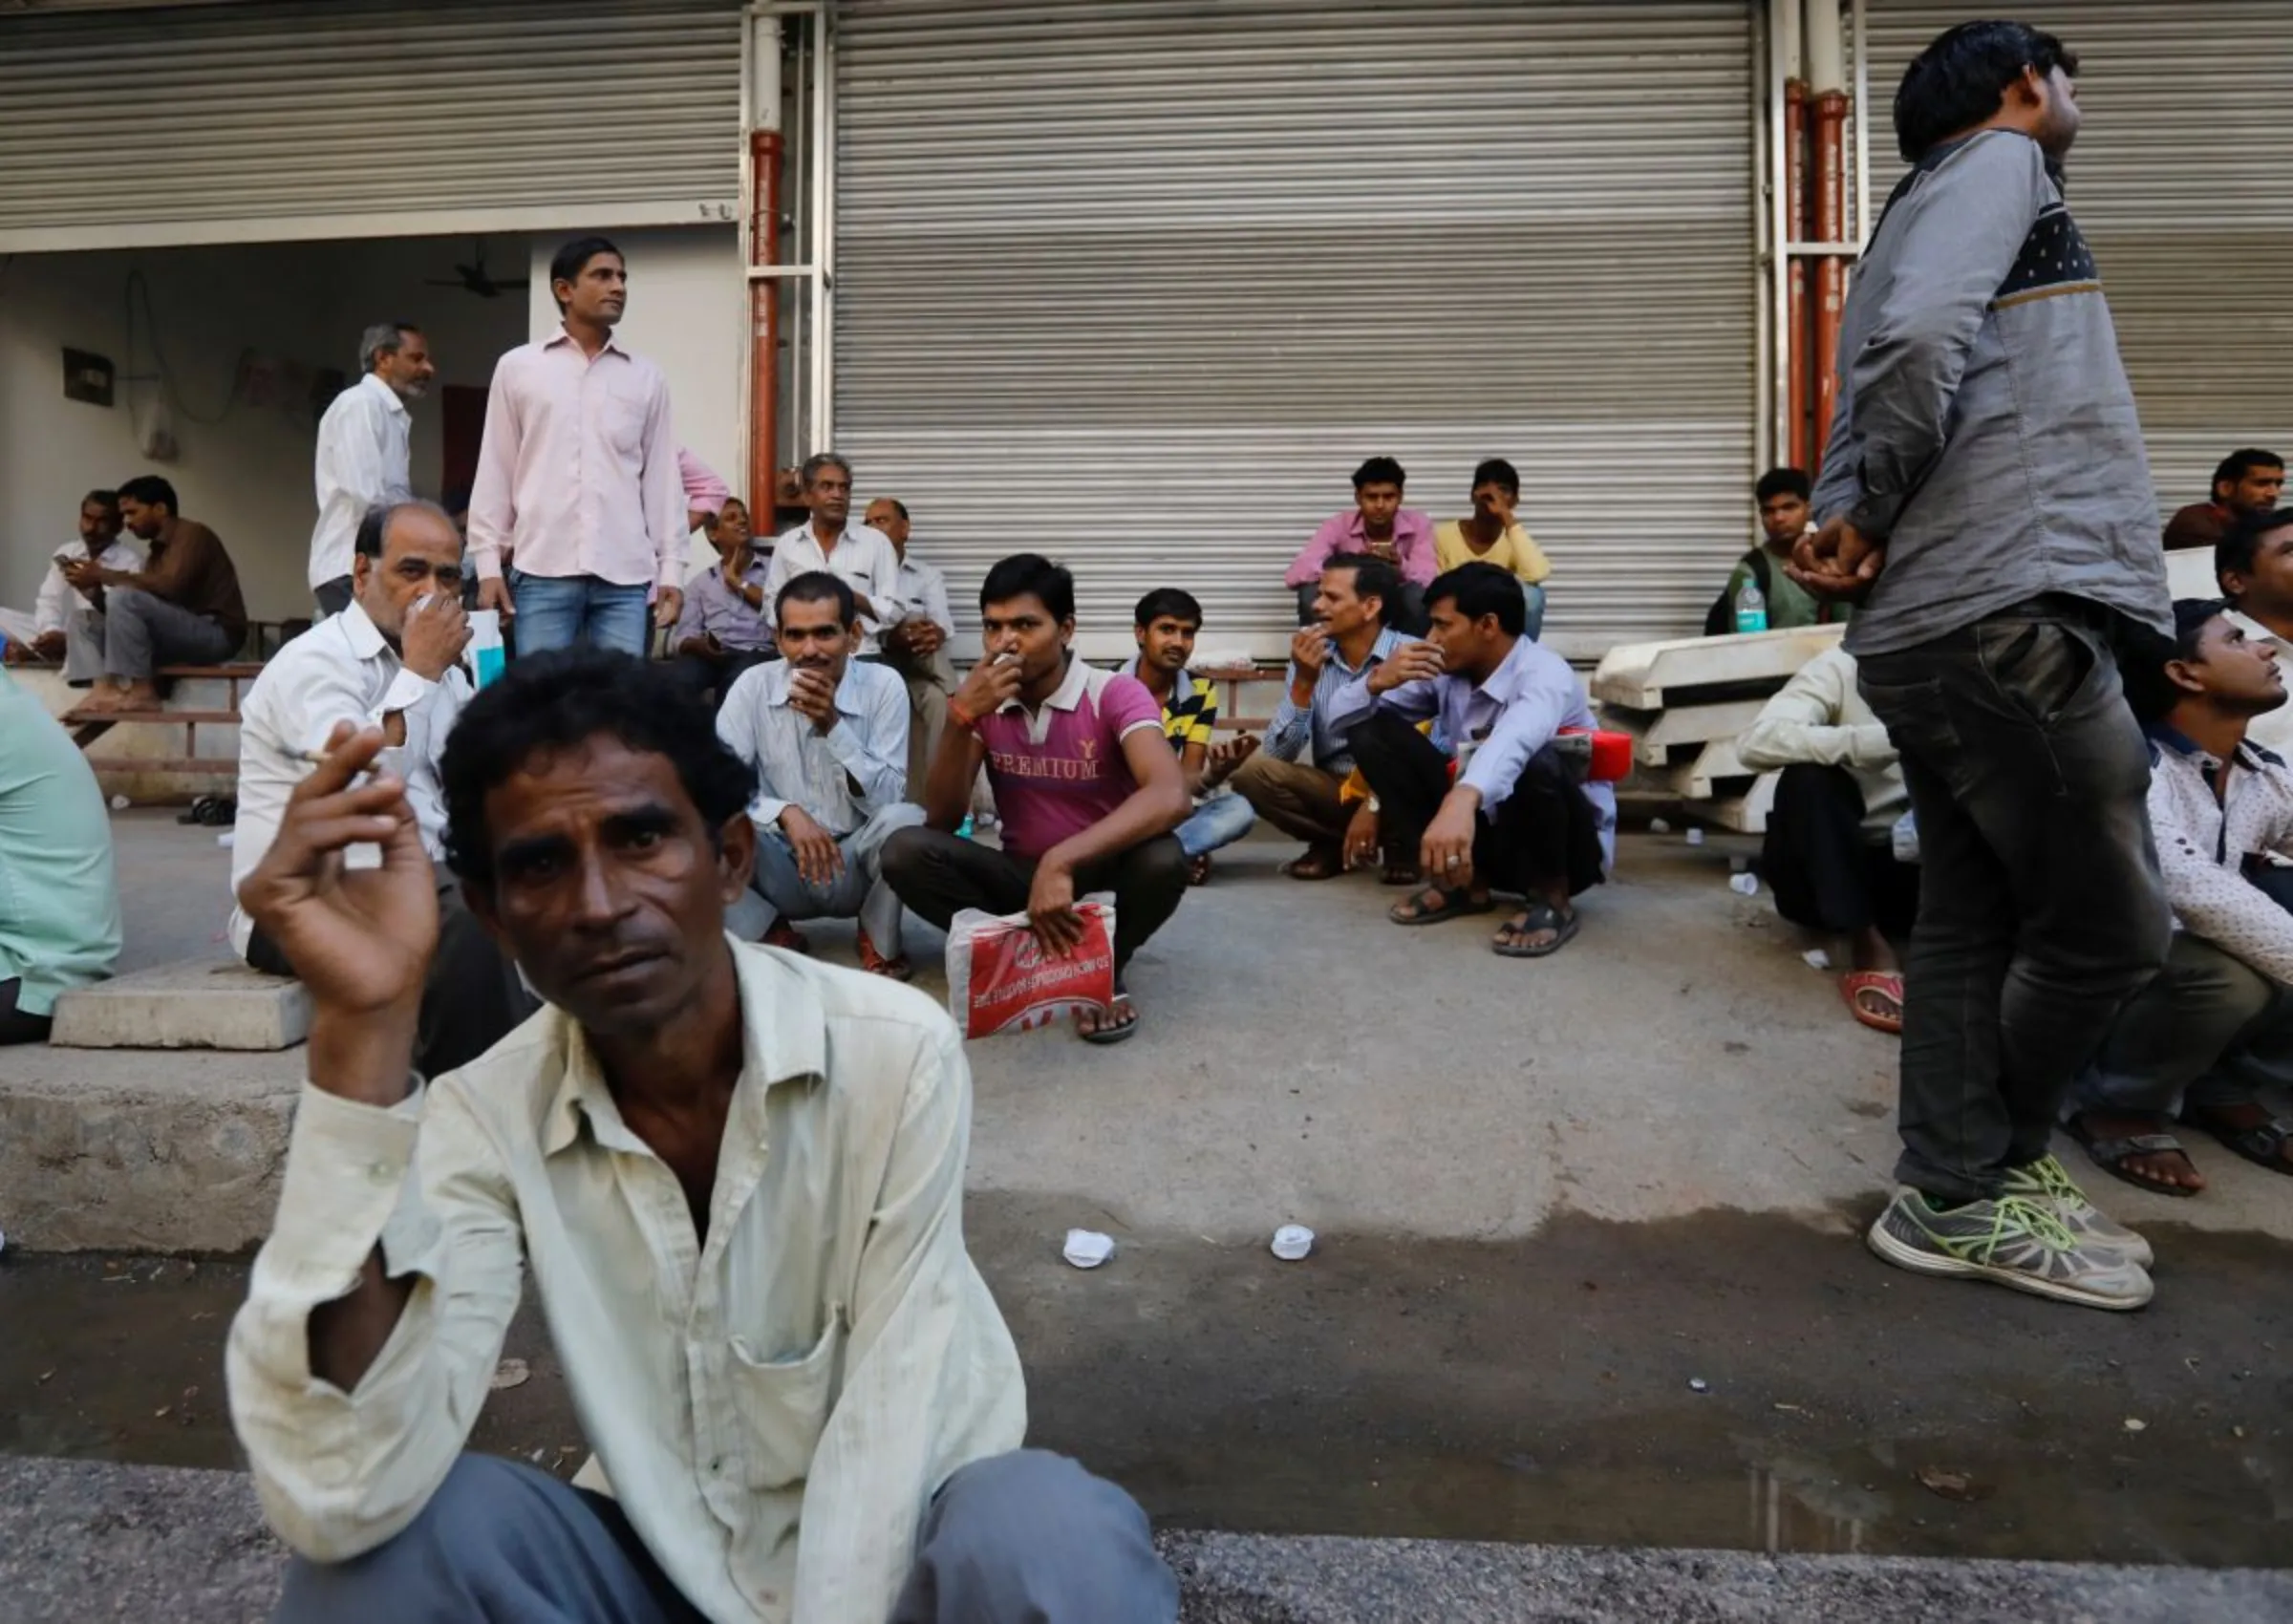 Tradespeople sit on the side of a road as they wait to get hired for work in Mumbai, India, November 6, 2017. REUTERS/Danish Siddiqui